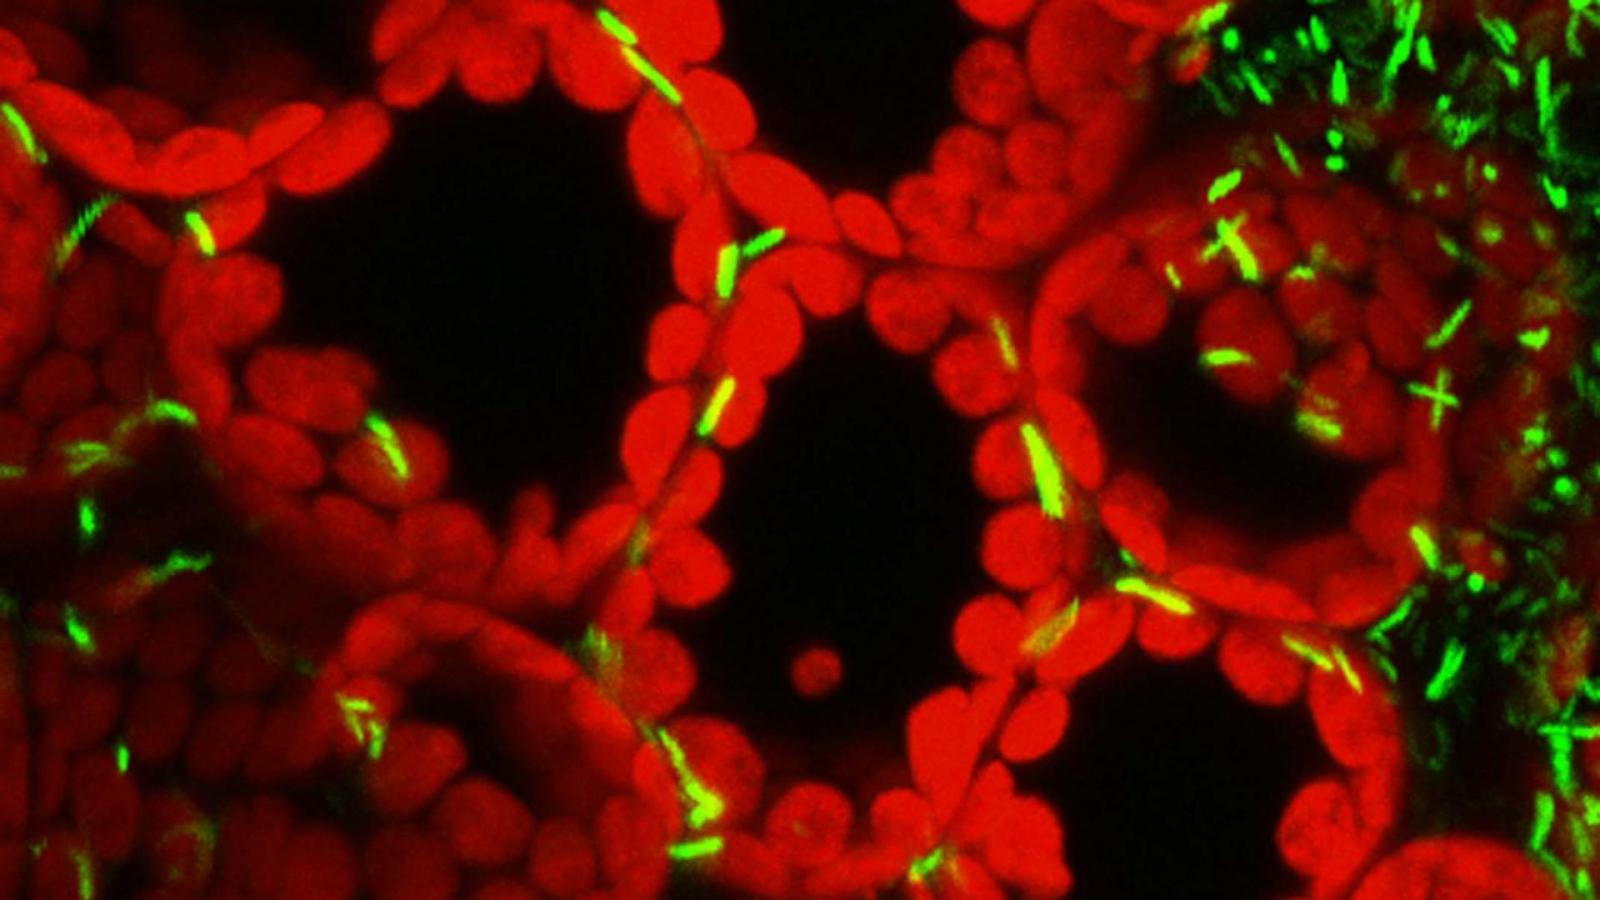 Plant Cells in red and green